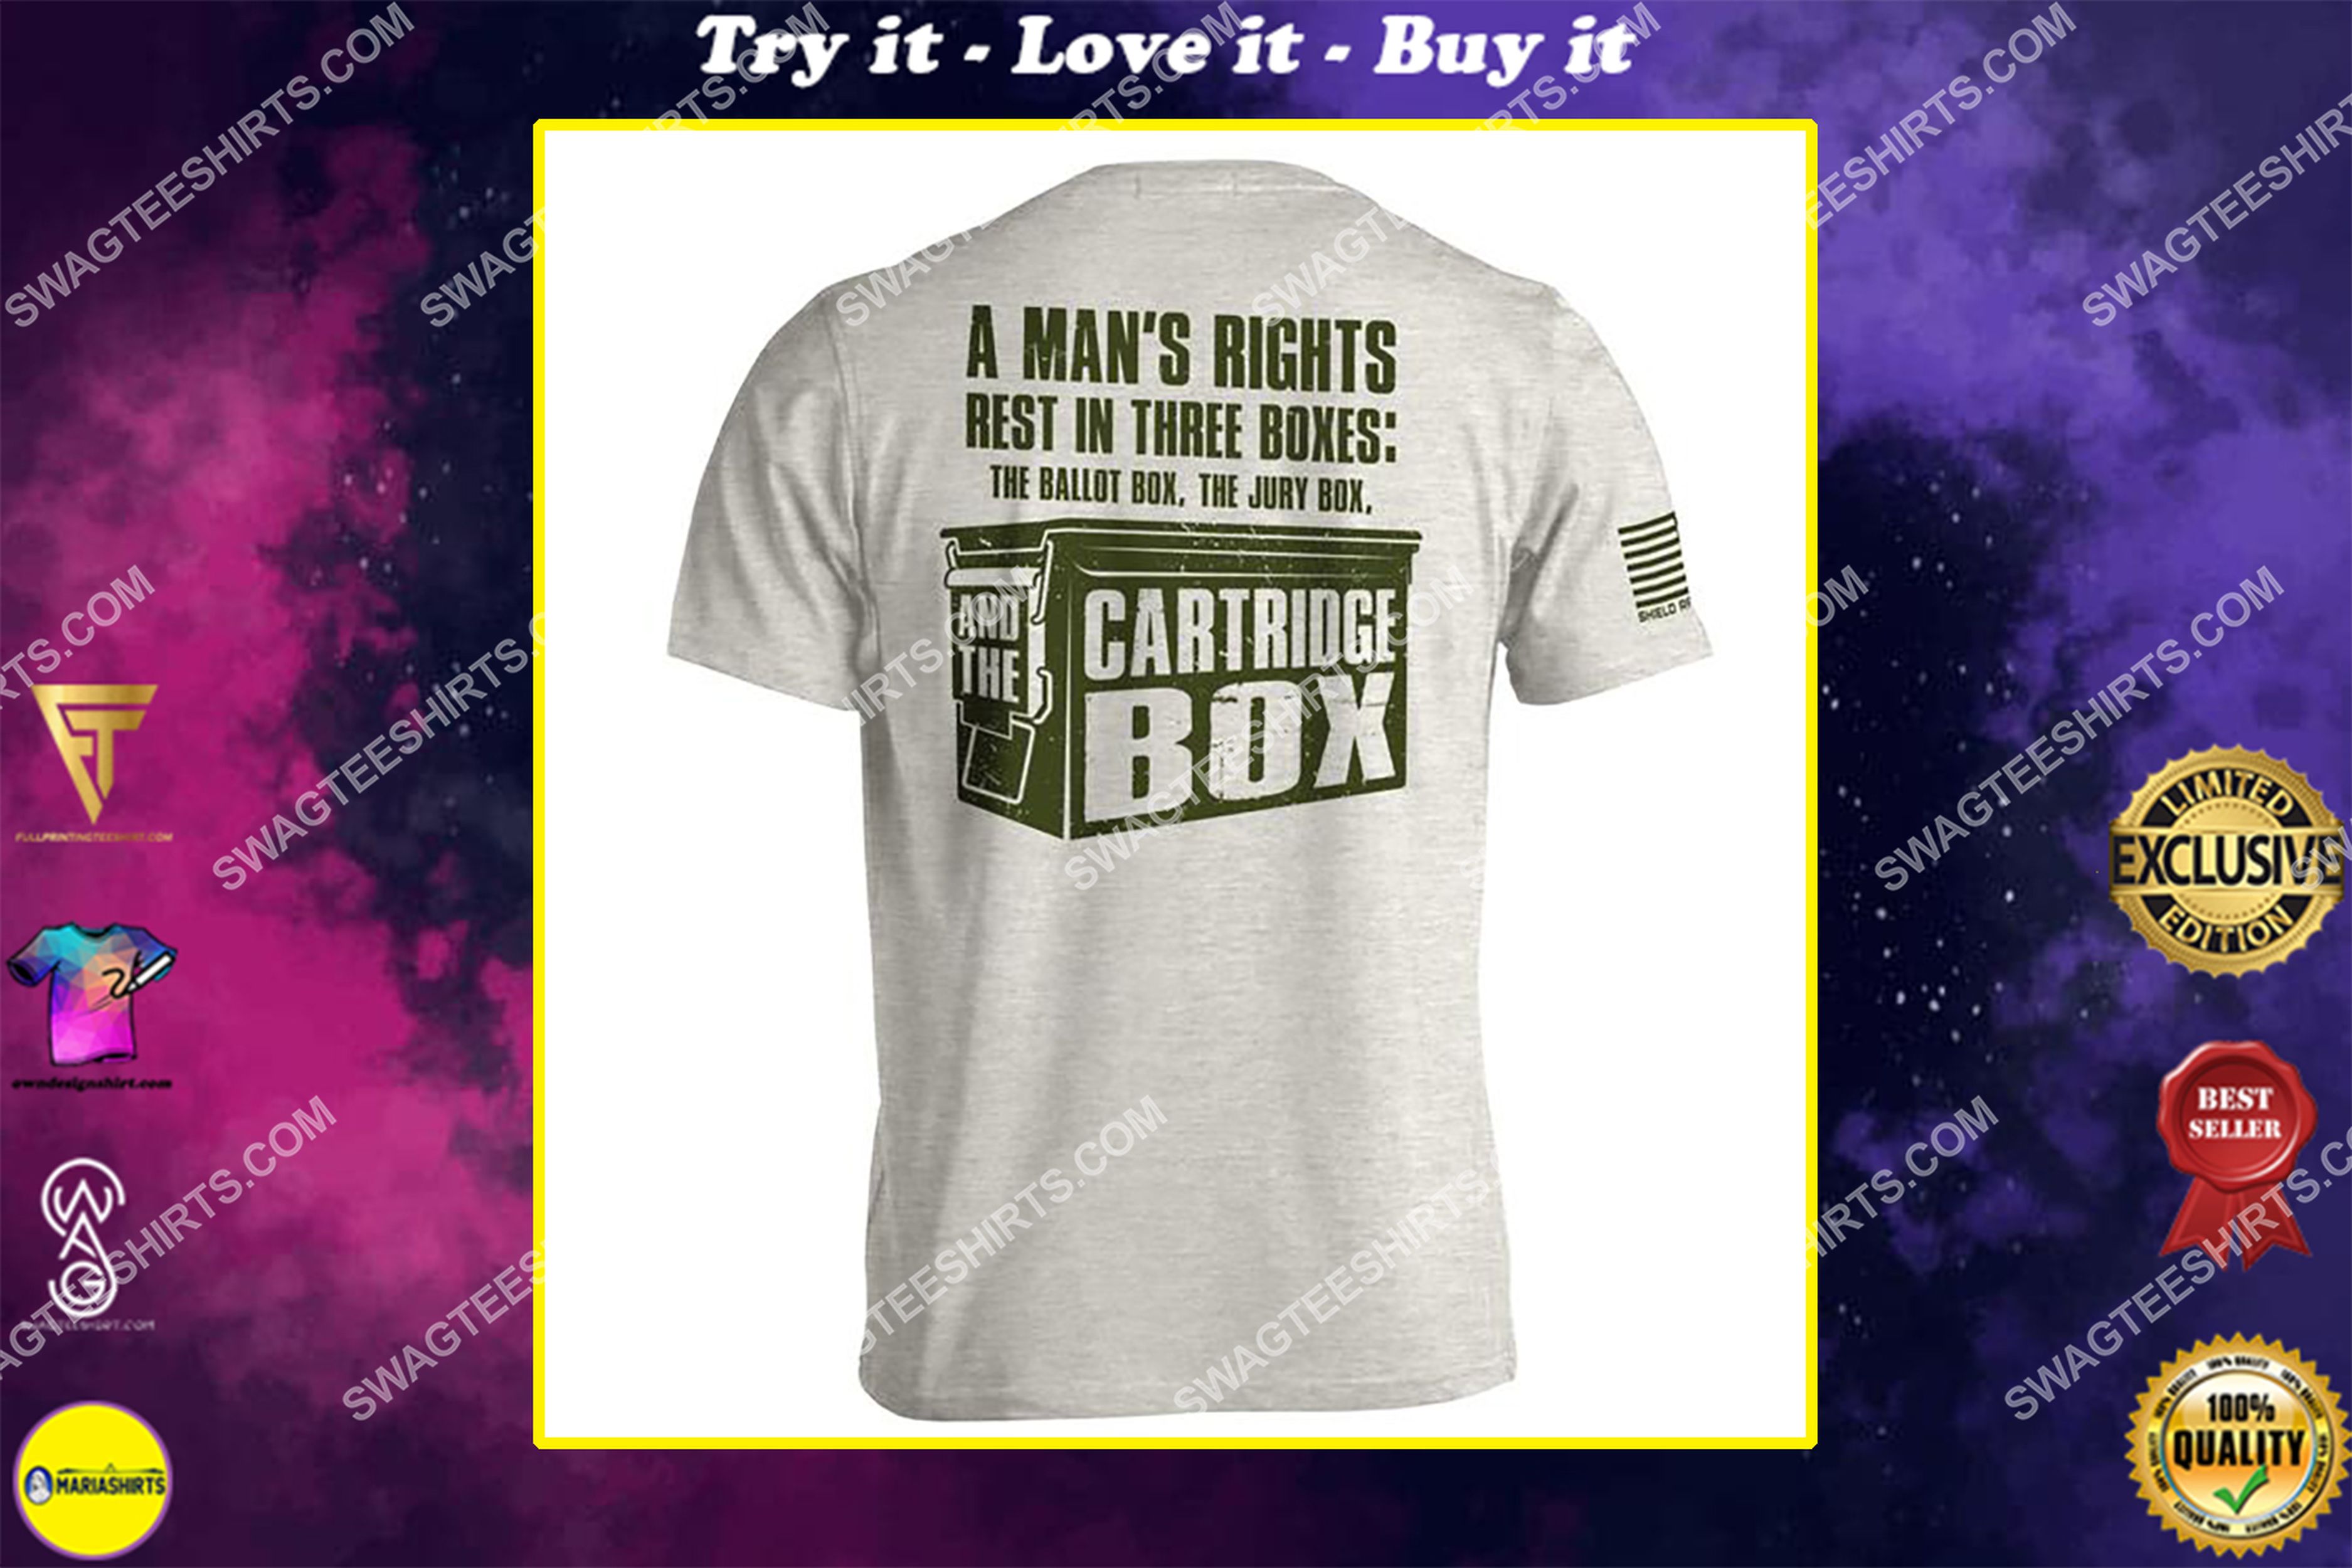 [special edition] a man’s rights rest in three boxes the ballot box jury box and the cartridge box shirt – maria